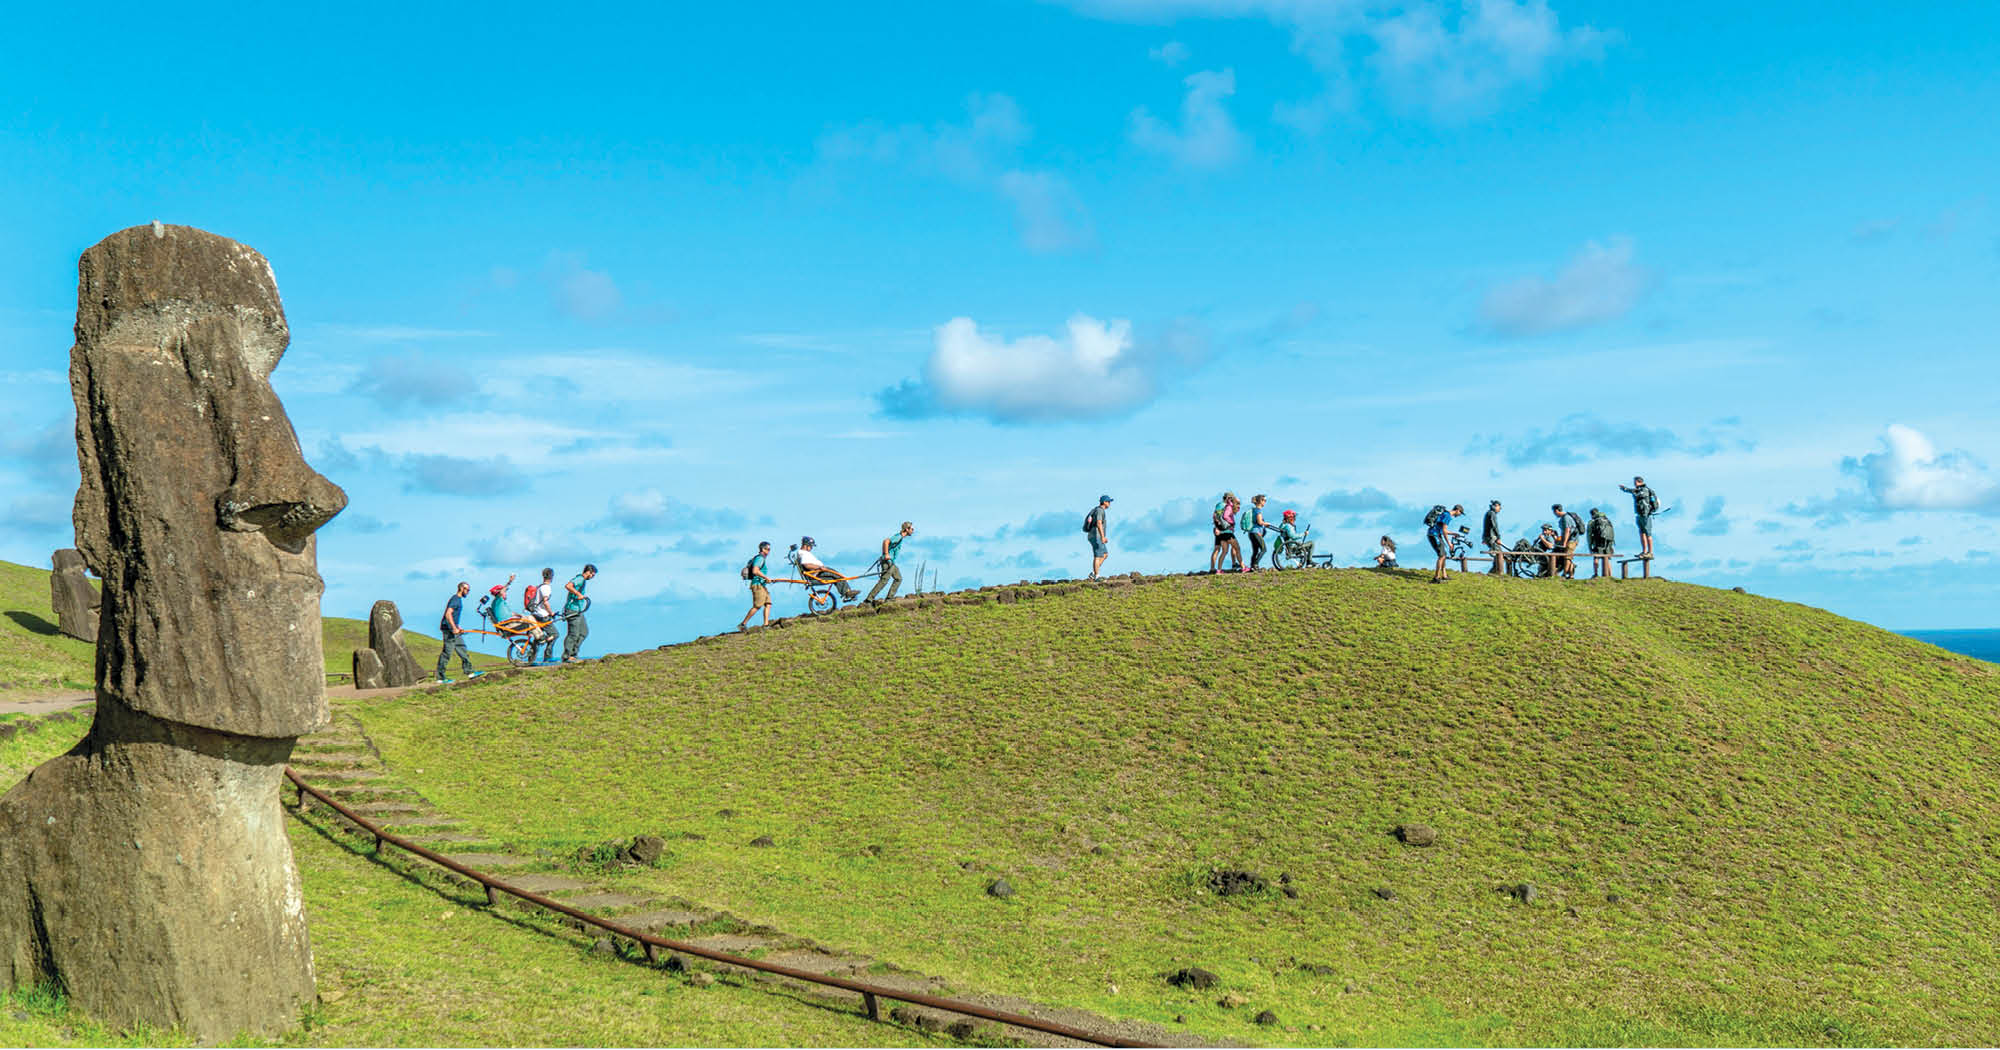 A line of people trekking through Easter Island on foot and in wheelchairs.